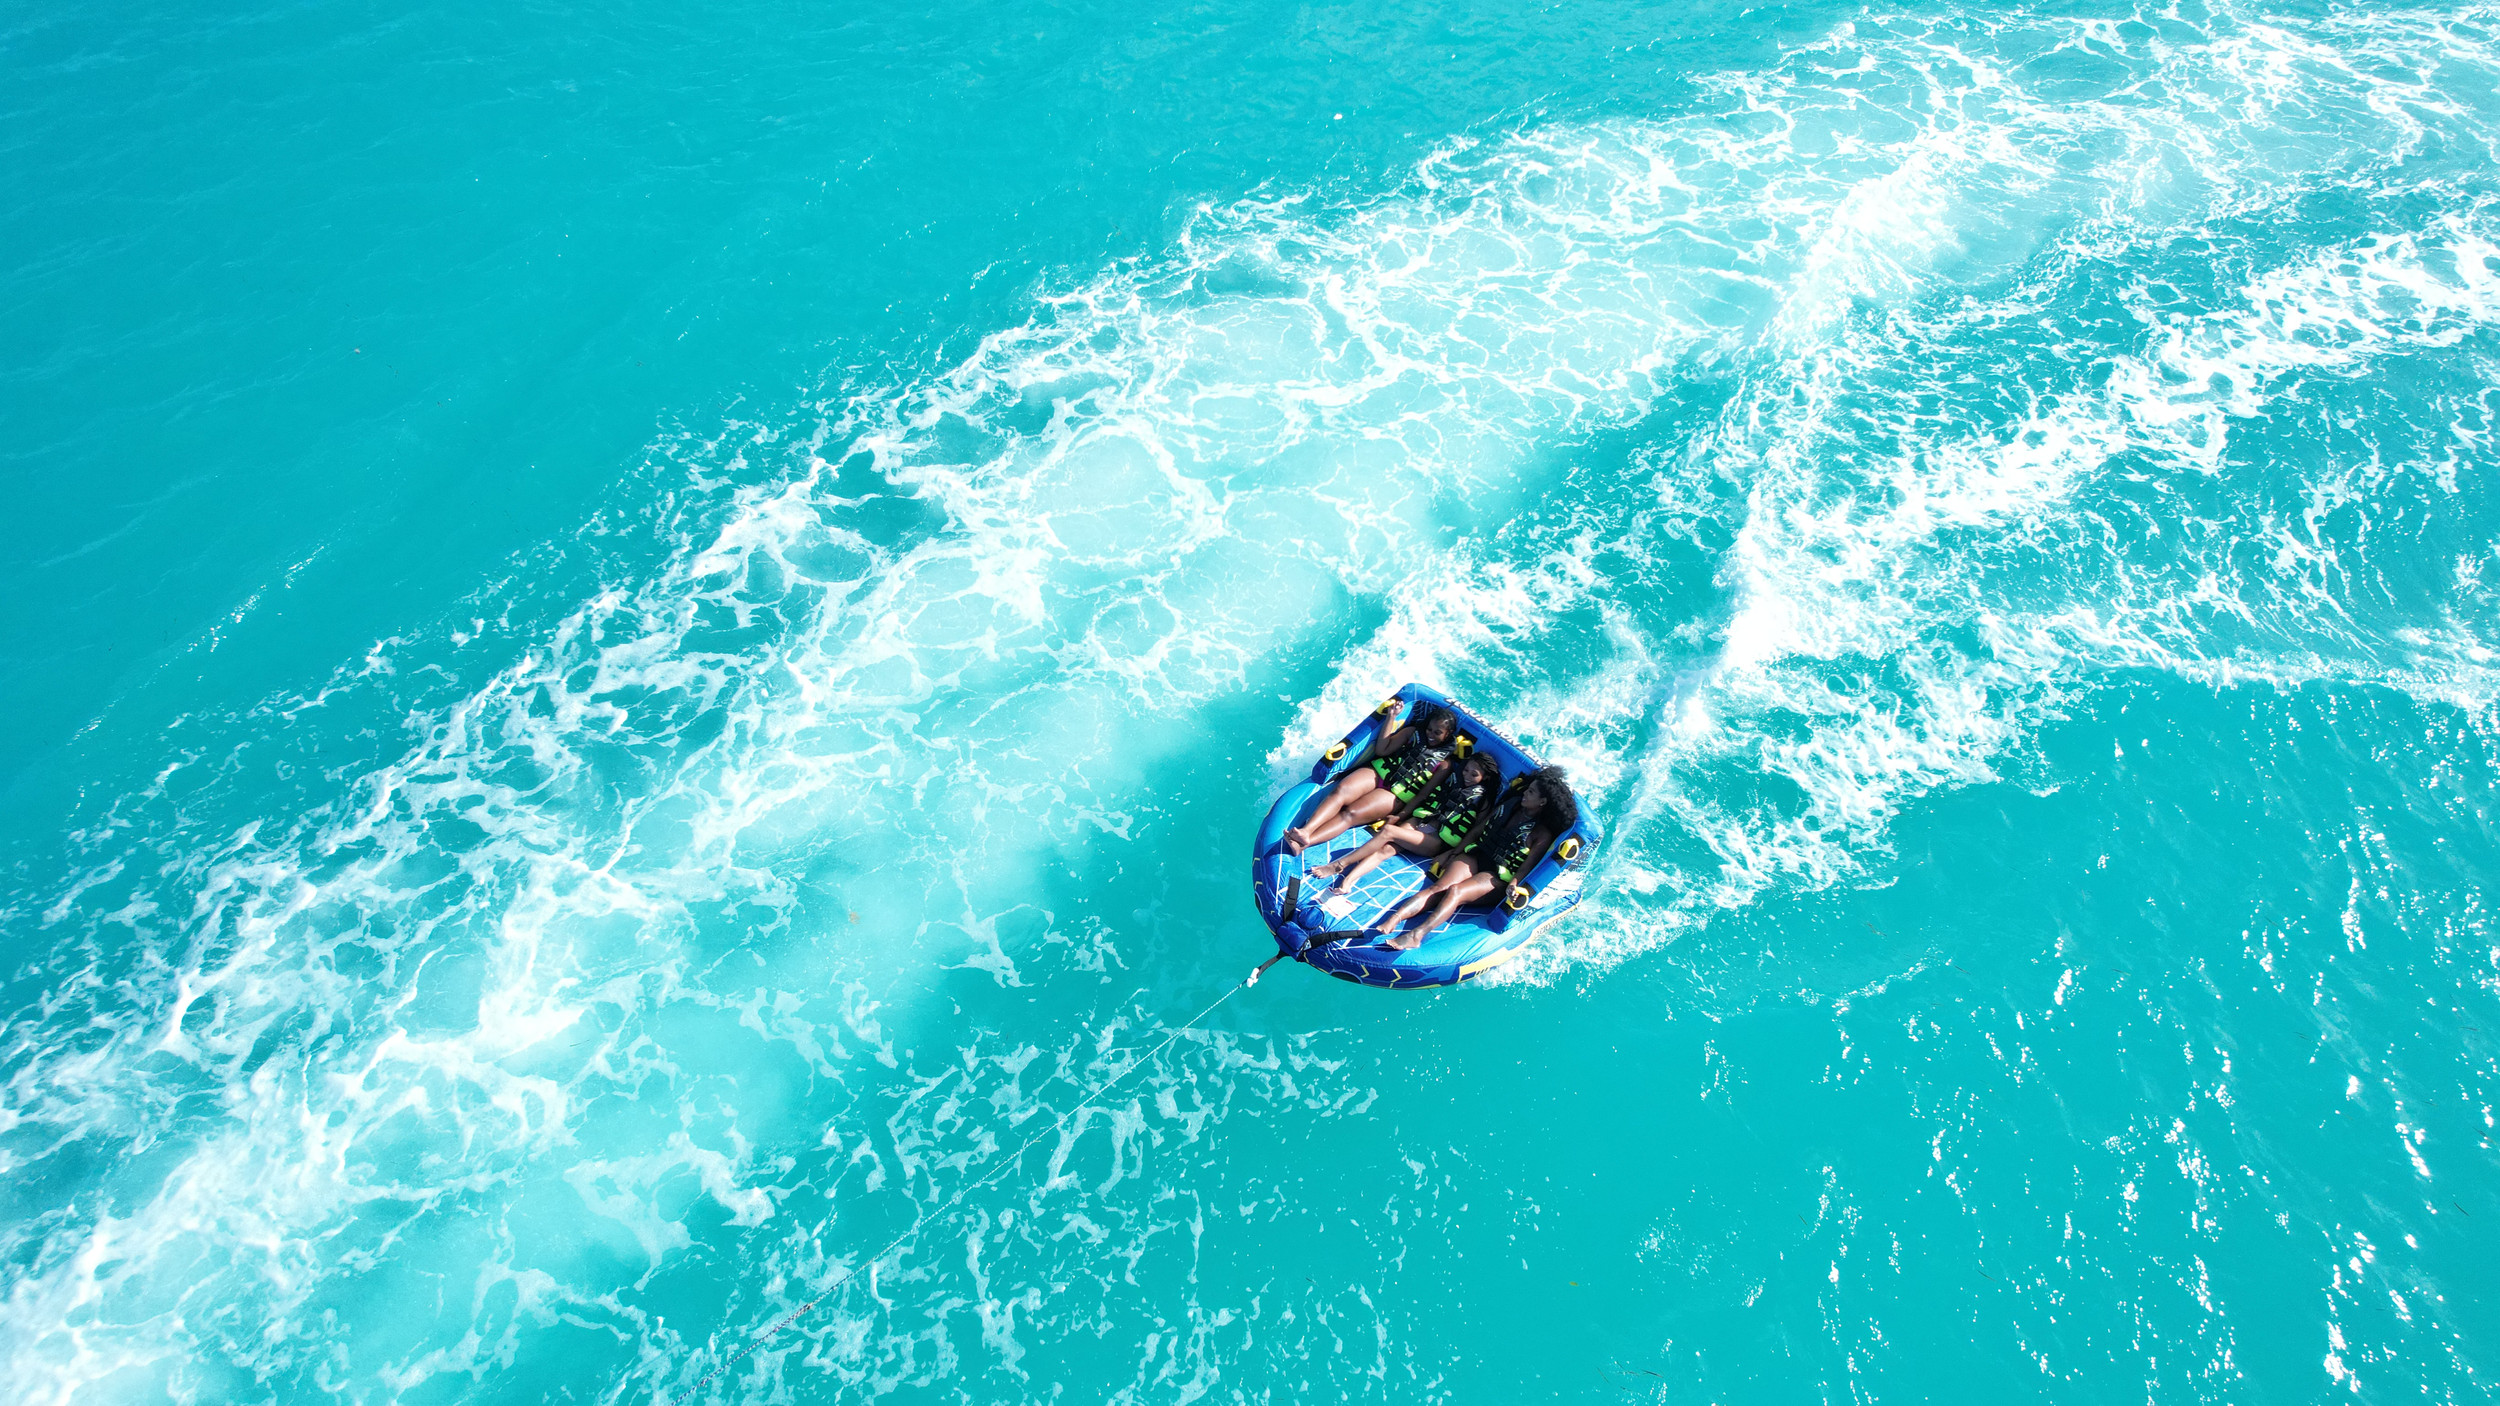 Watersport Activities in Turks and Caicos With Turks Ventures